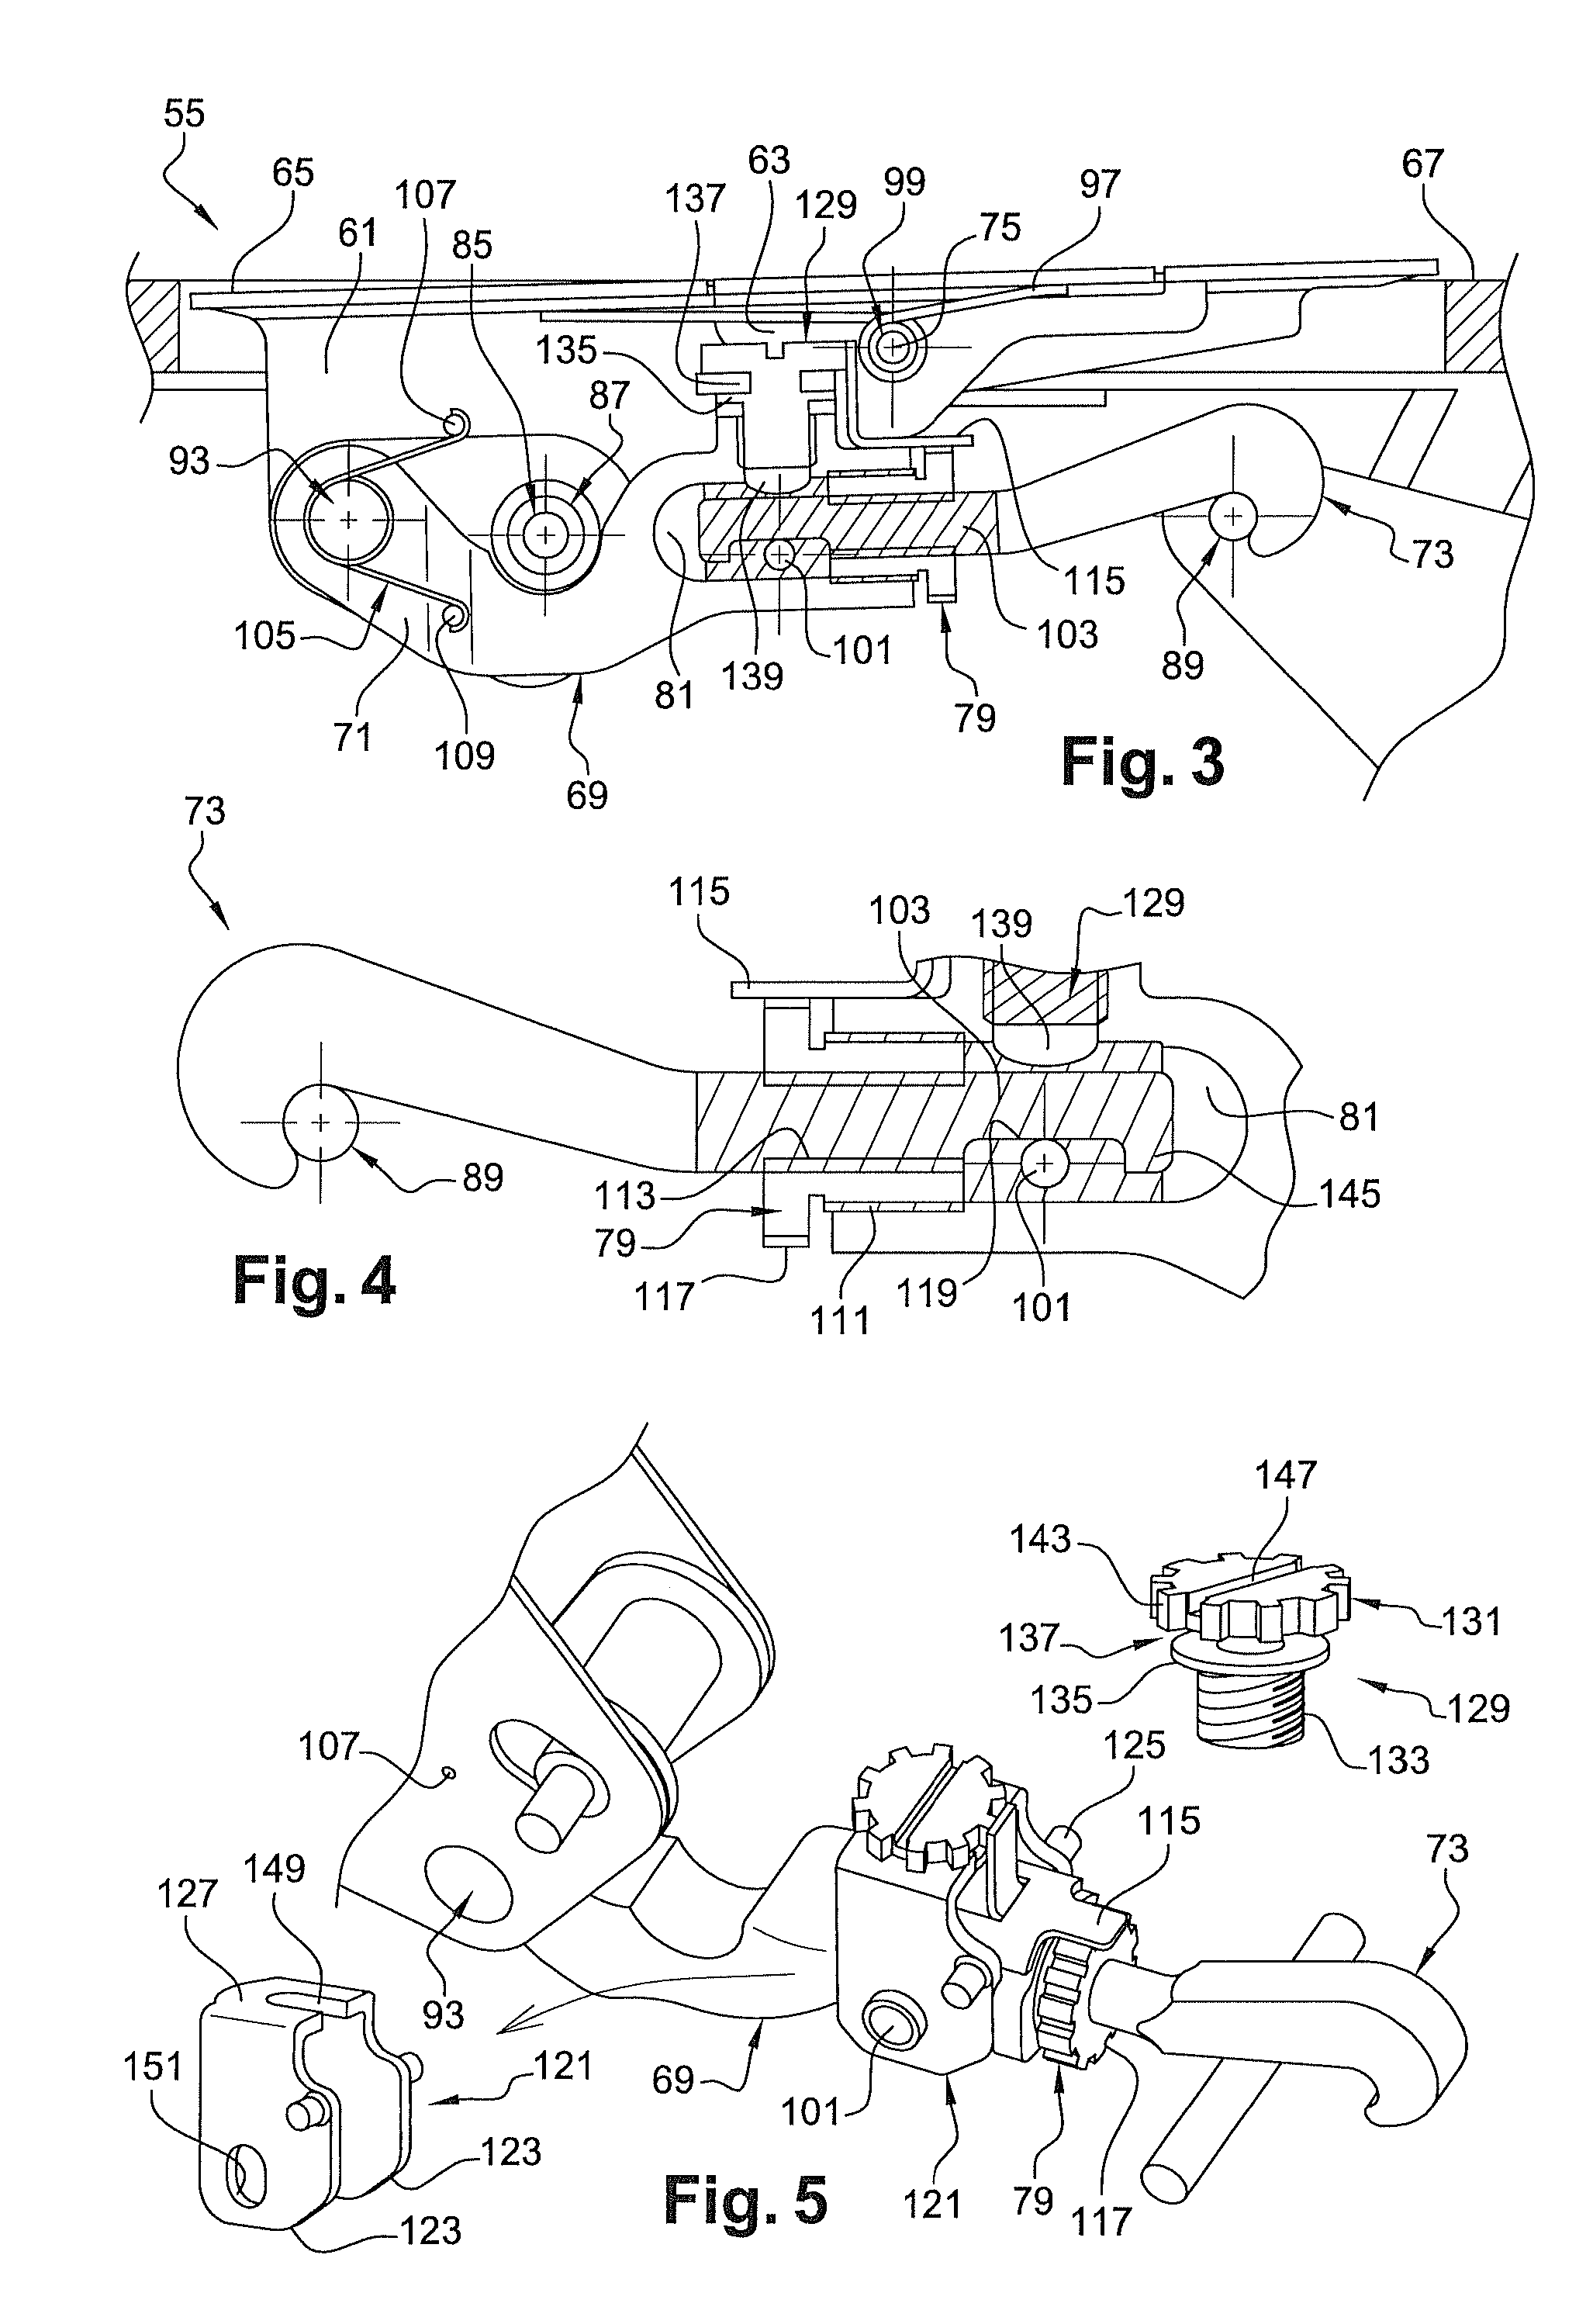 Hook latch fitted with a positioning device and a method for assembling such a latch